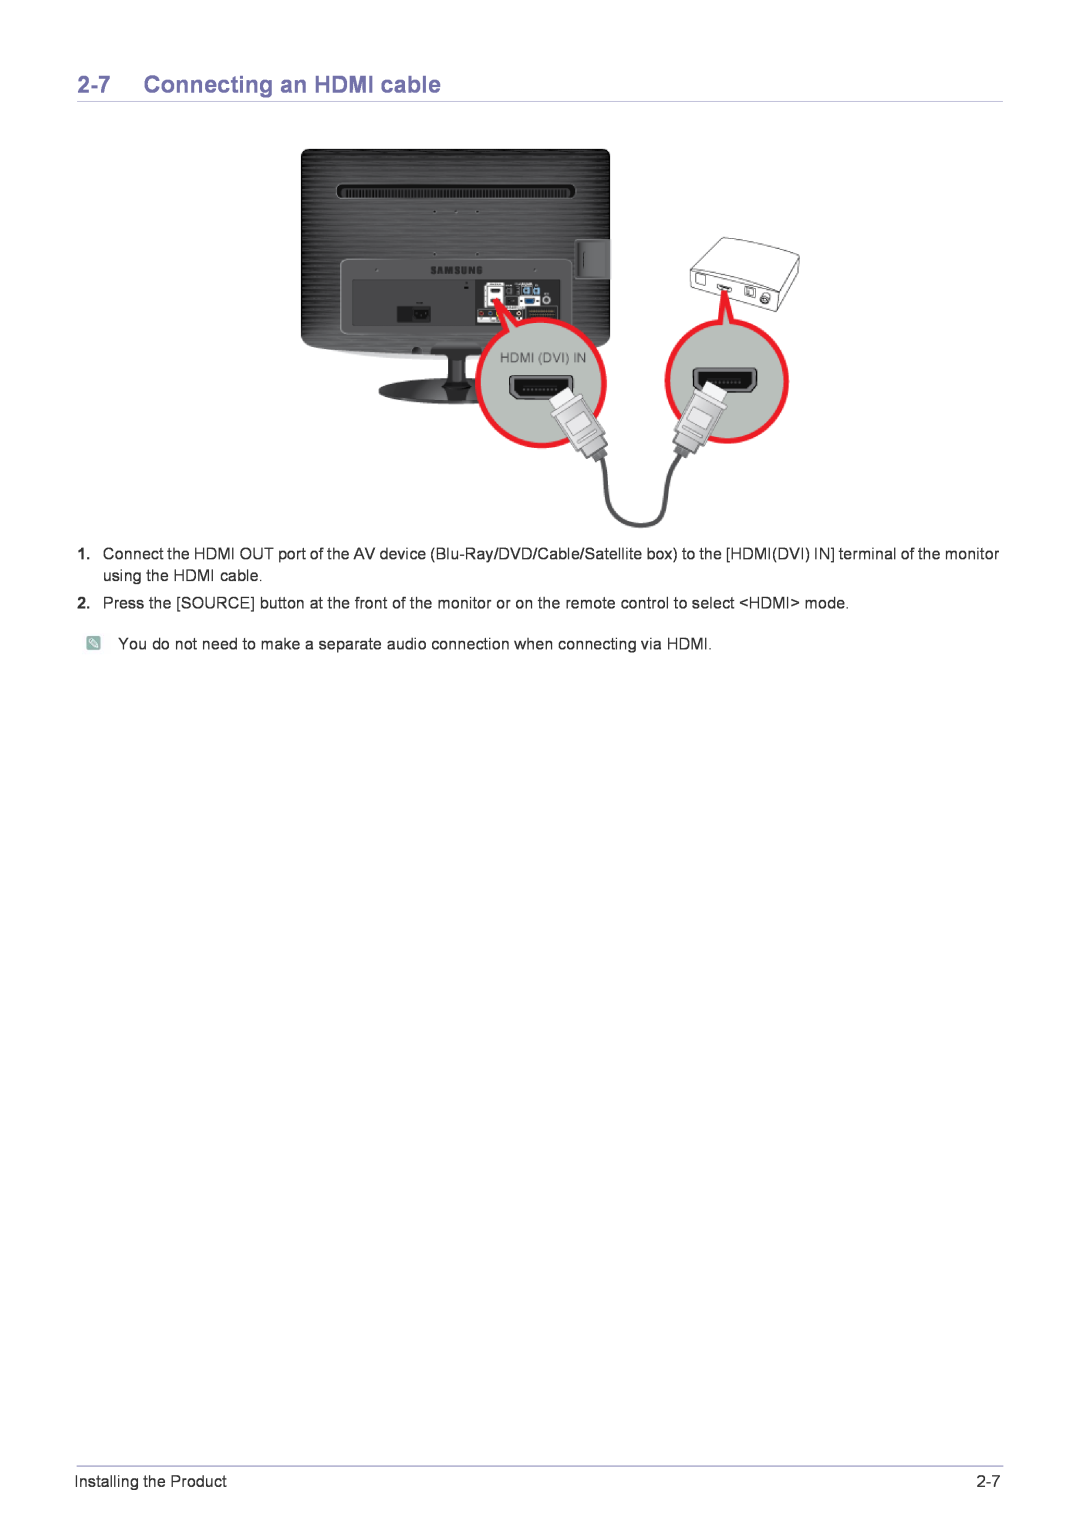 Samsung B1930HD, B2330HD, B2430HD, B2230HD, B2030HD user manual Connecting an HDMI cable 